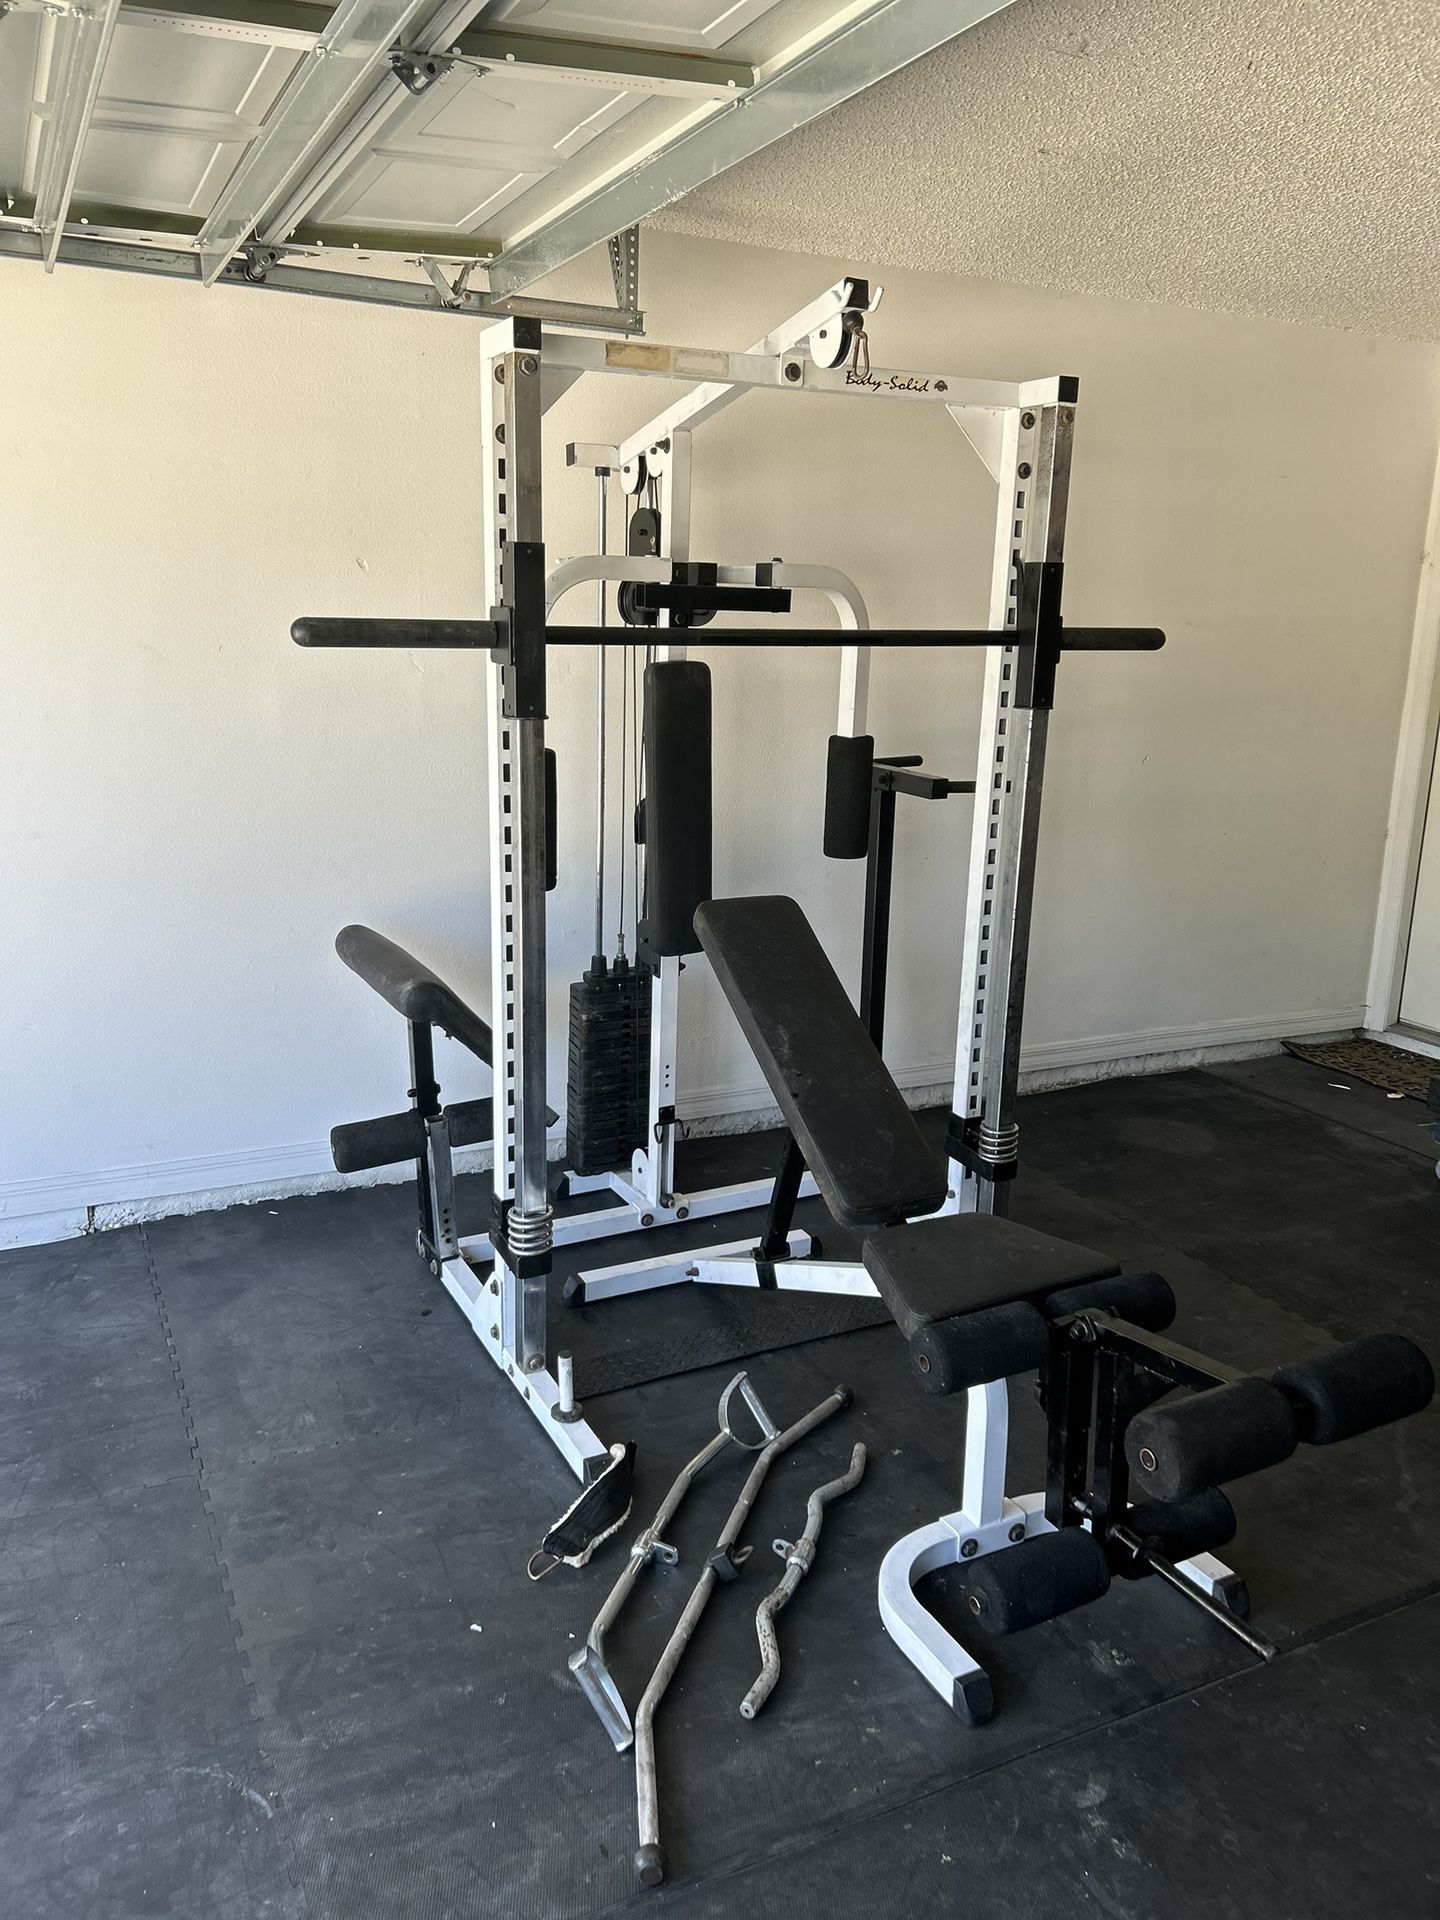 Body-Solid Smith Machine Complete Home Gym